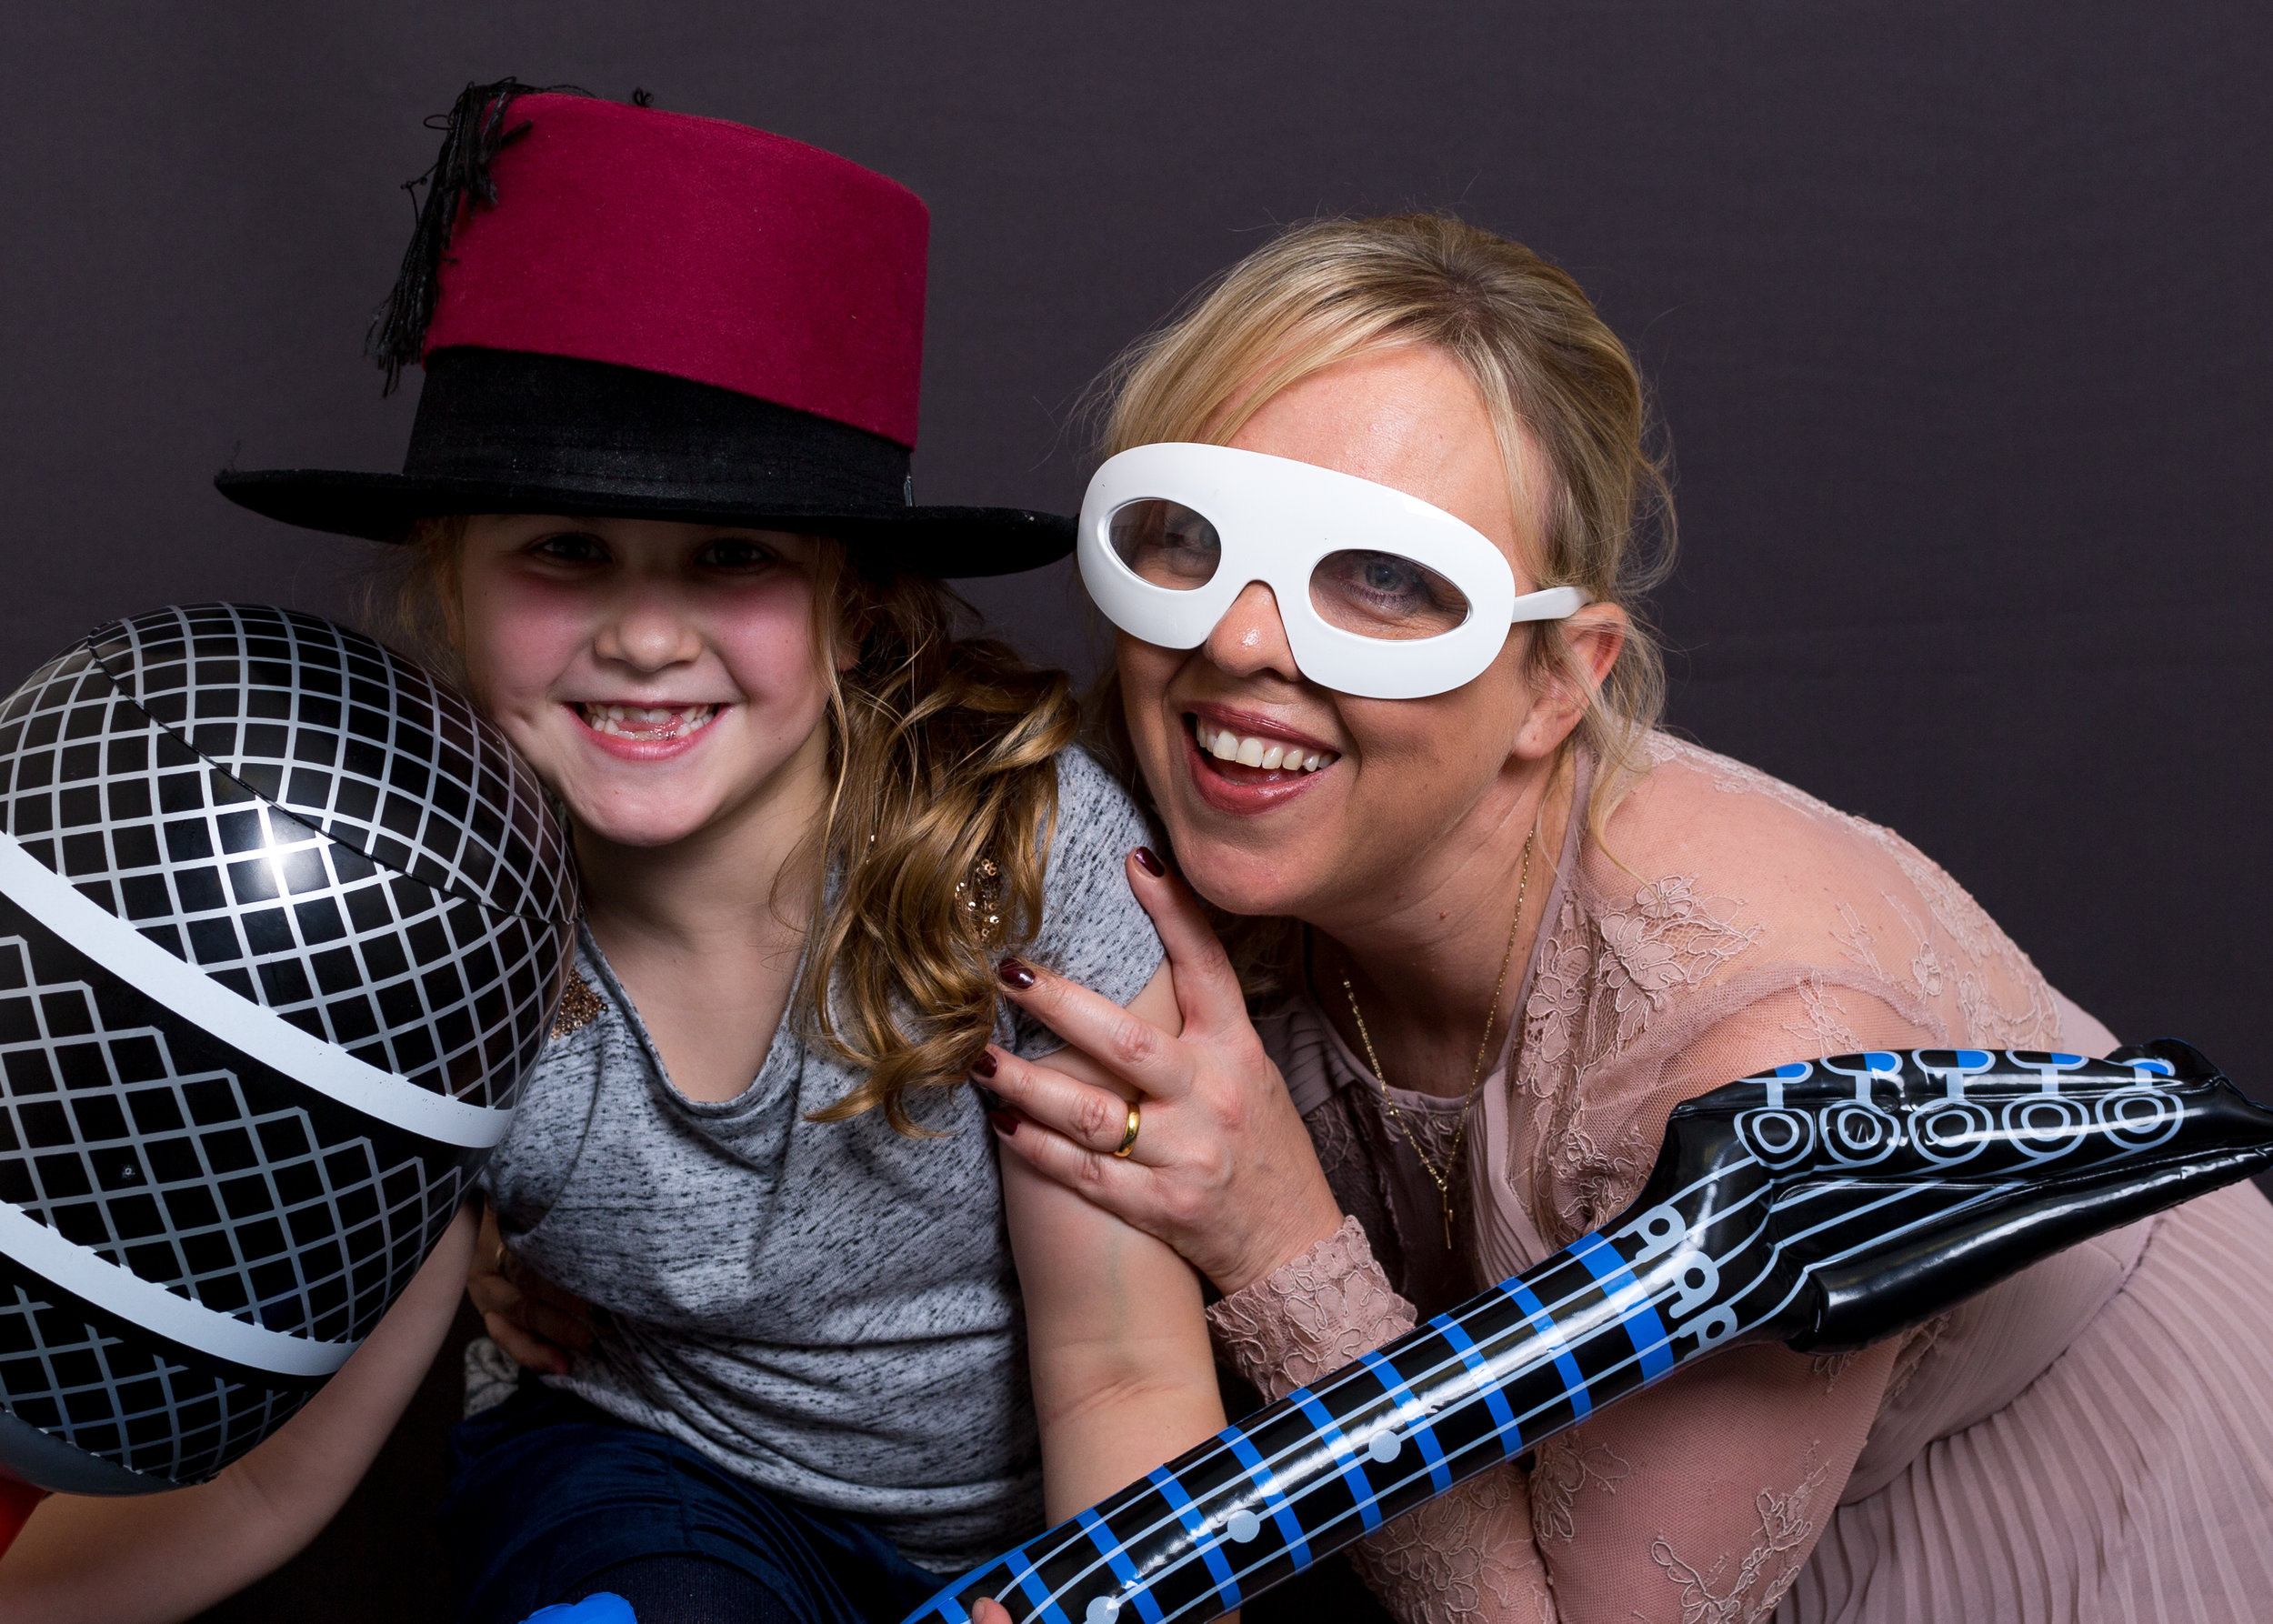 wedding photographer and a fun photo booth south wales